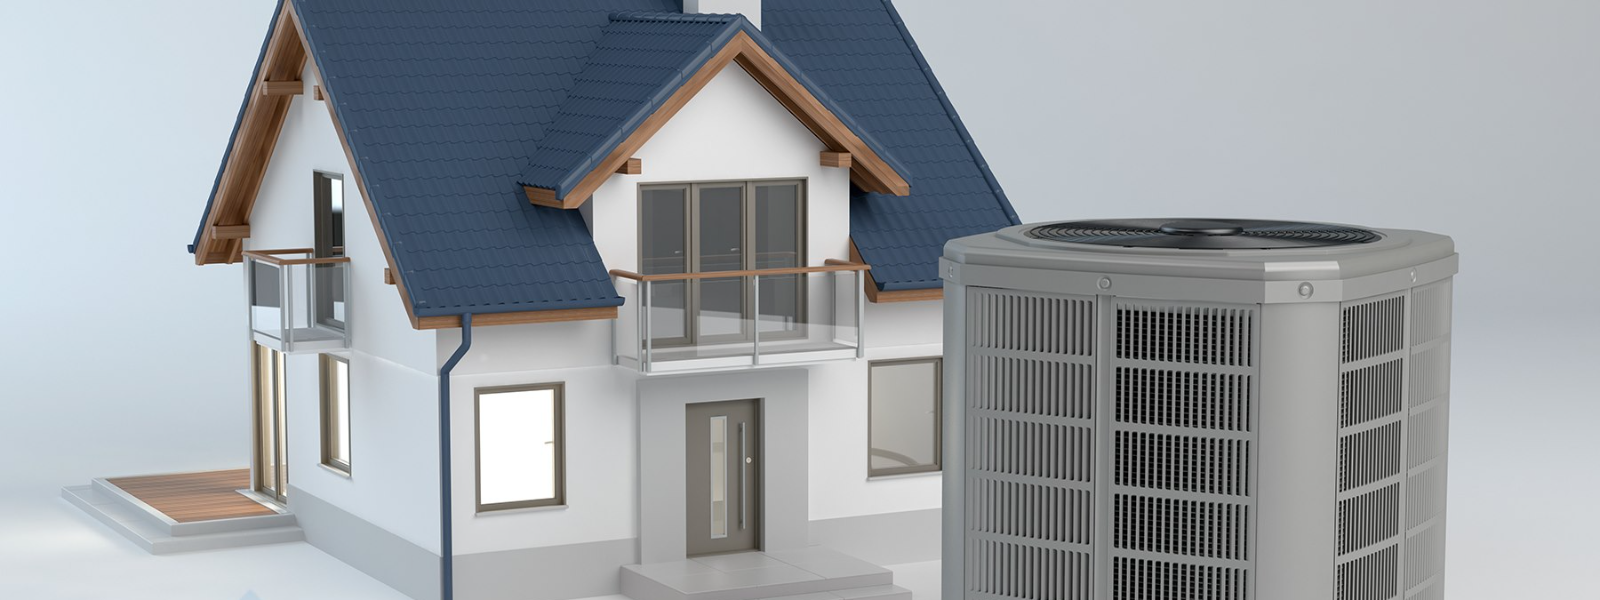 MAAKÜTE OÜ - We offer a comprehensive range of services including the sale and installation of heat pumps, ventilation s...